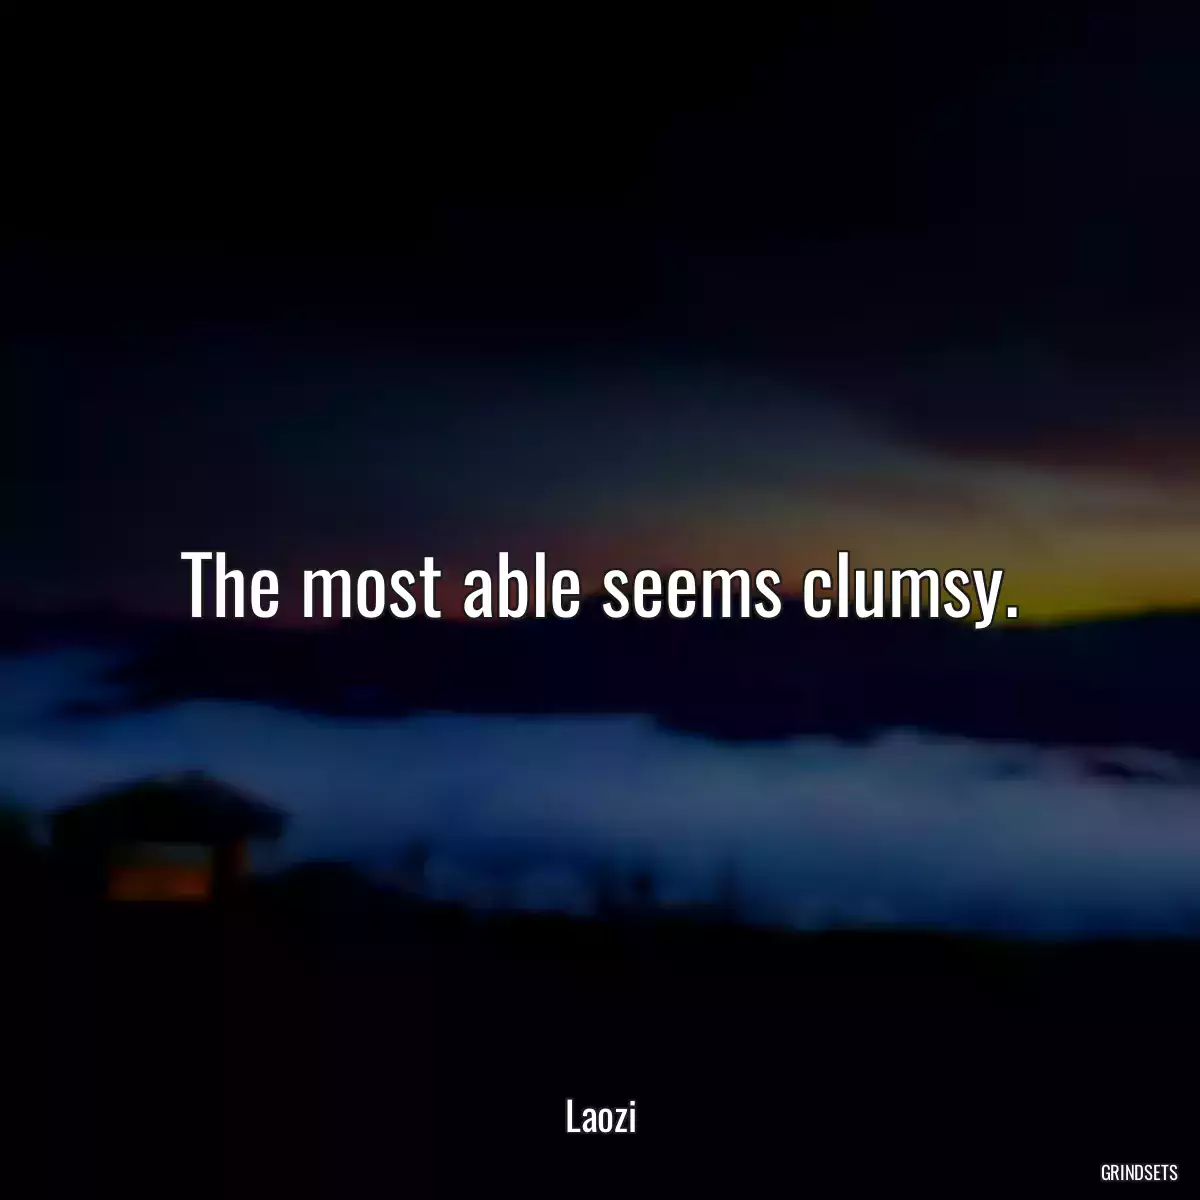 The most able seems clumsy.